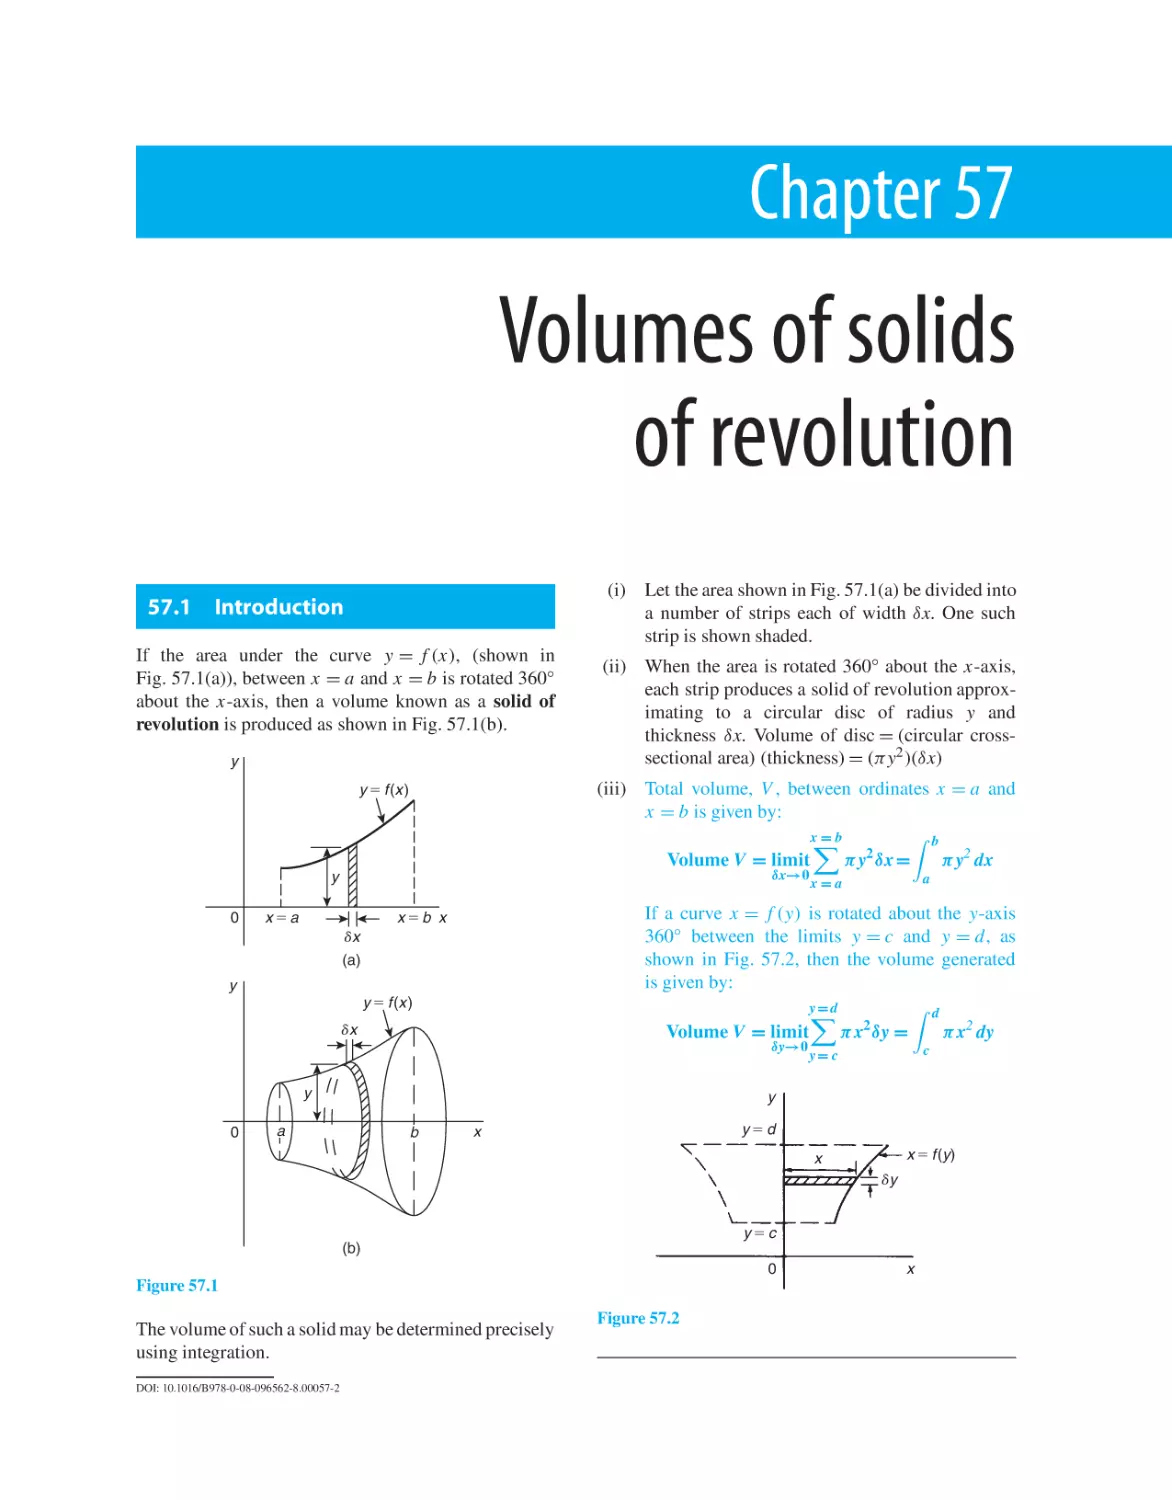 Chapter 57. Volumes of solids of revolution
57.1 Introduction